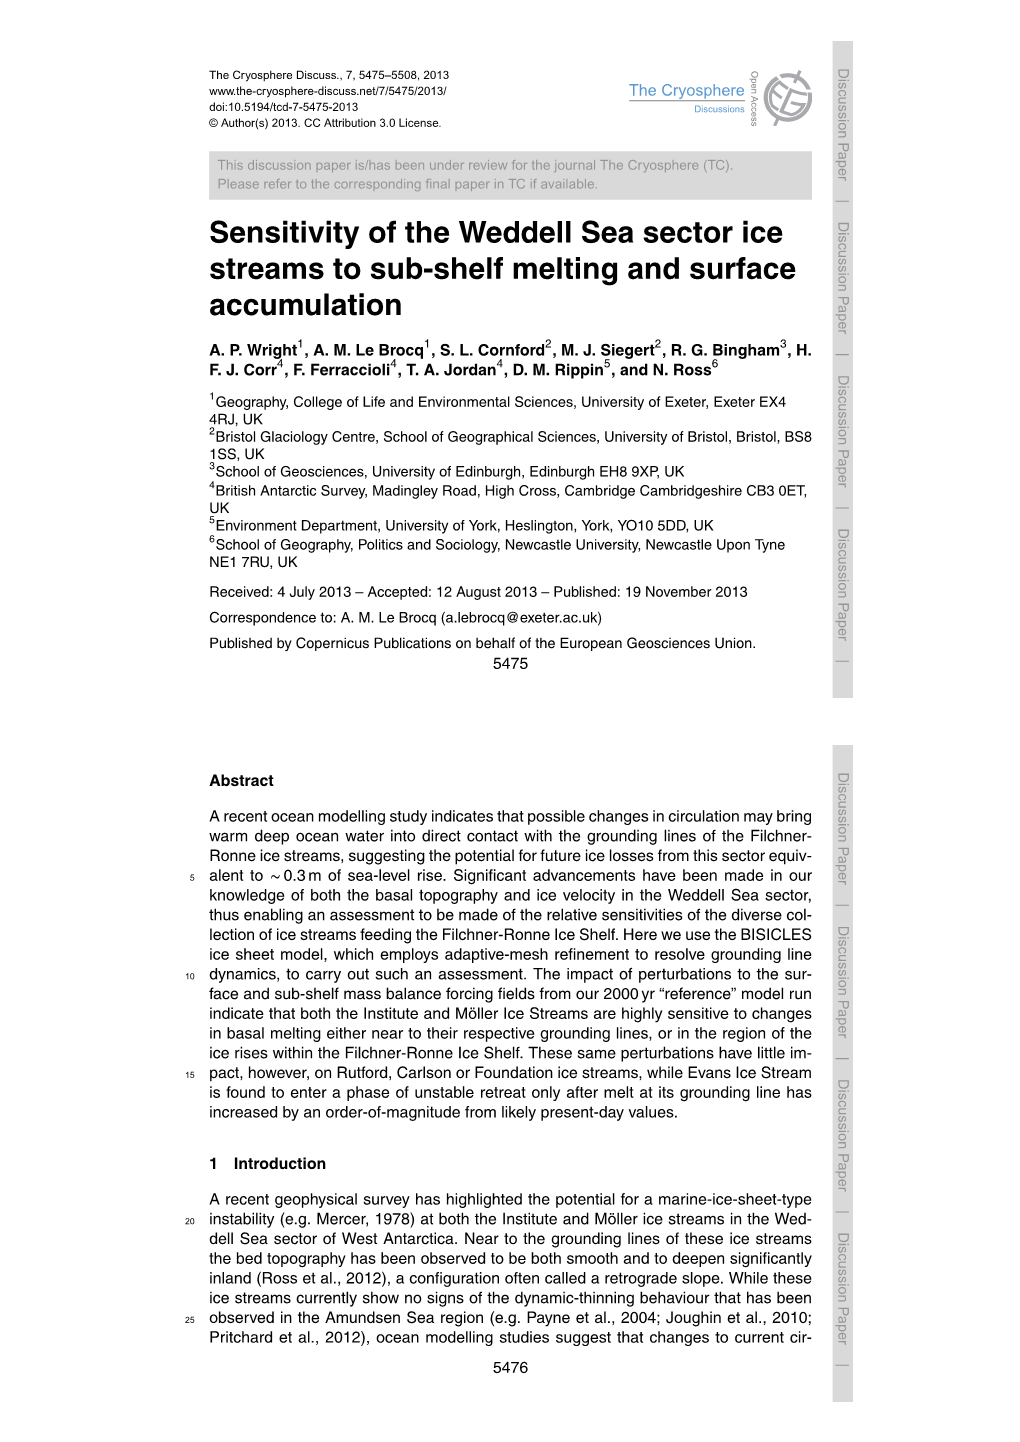 Sensitivity of the Weddell Sea Sector Ice Streams to Sub-Shelf Melting And